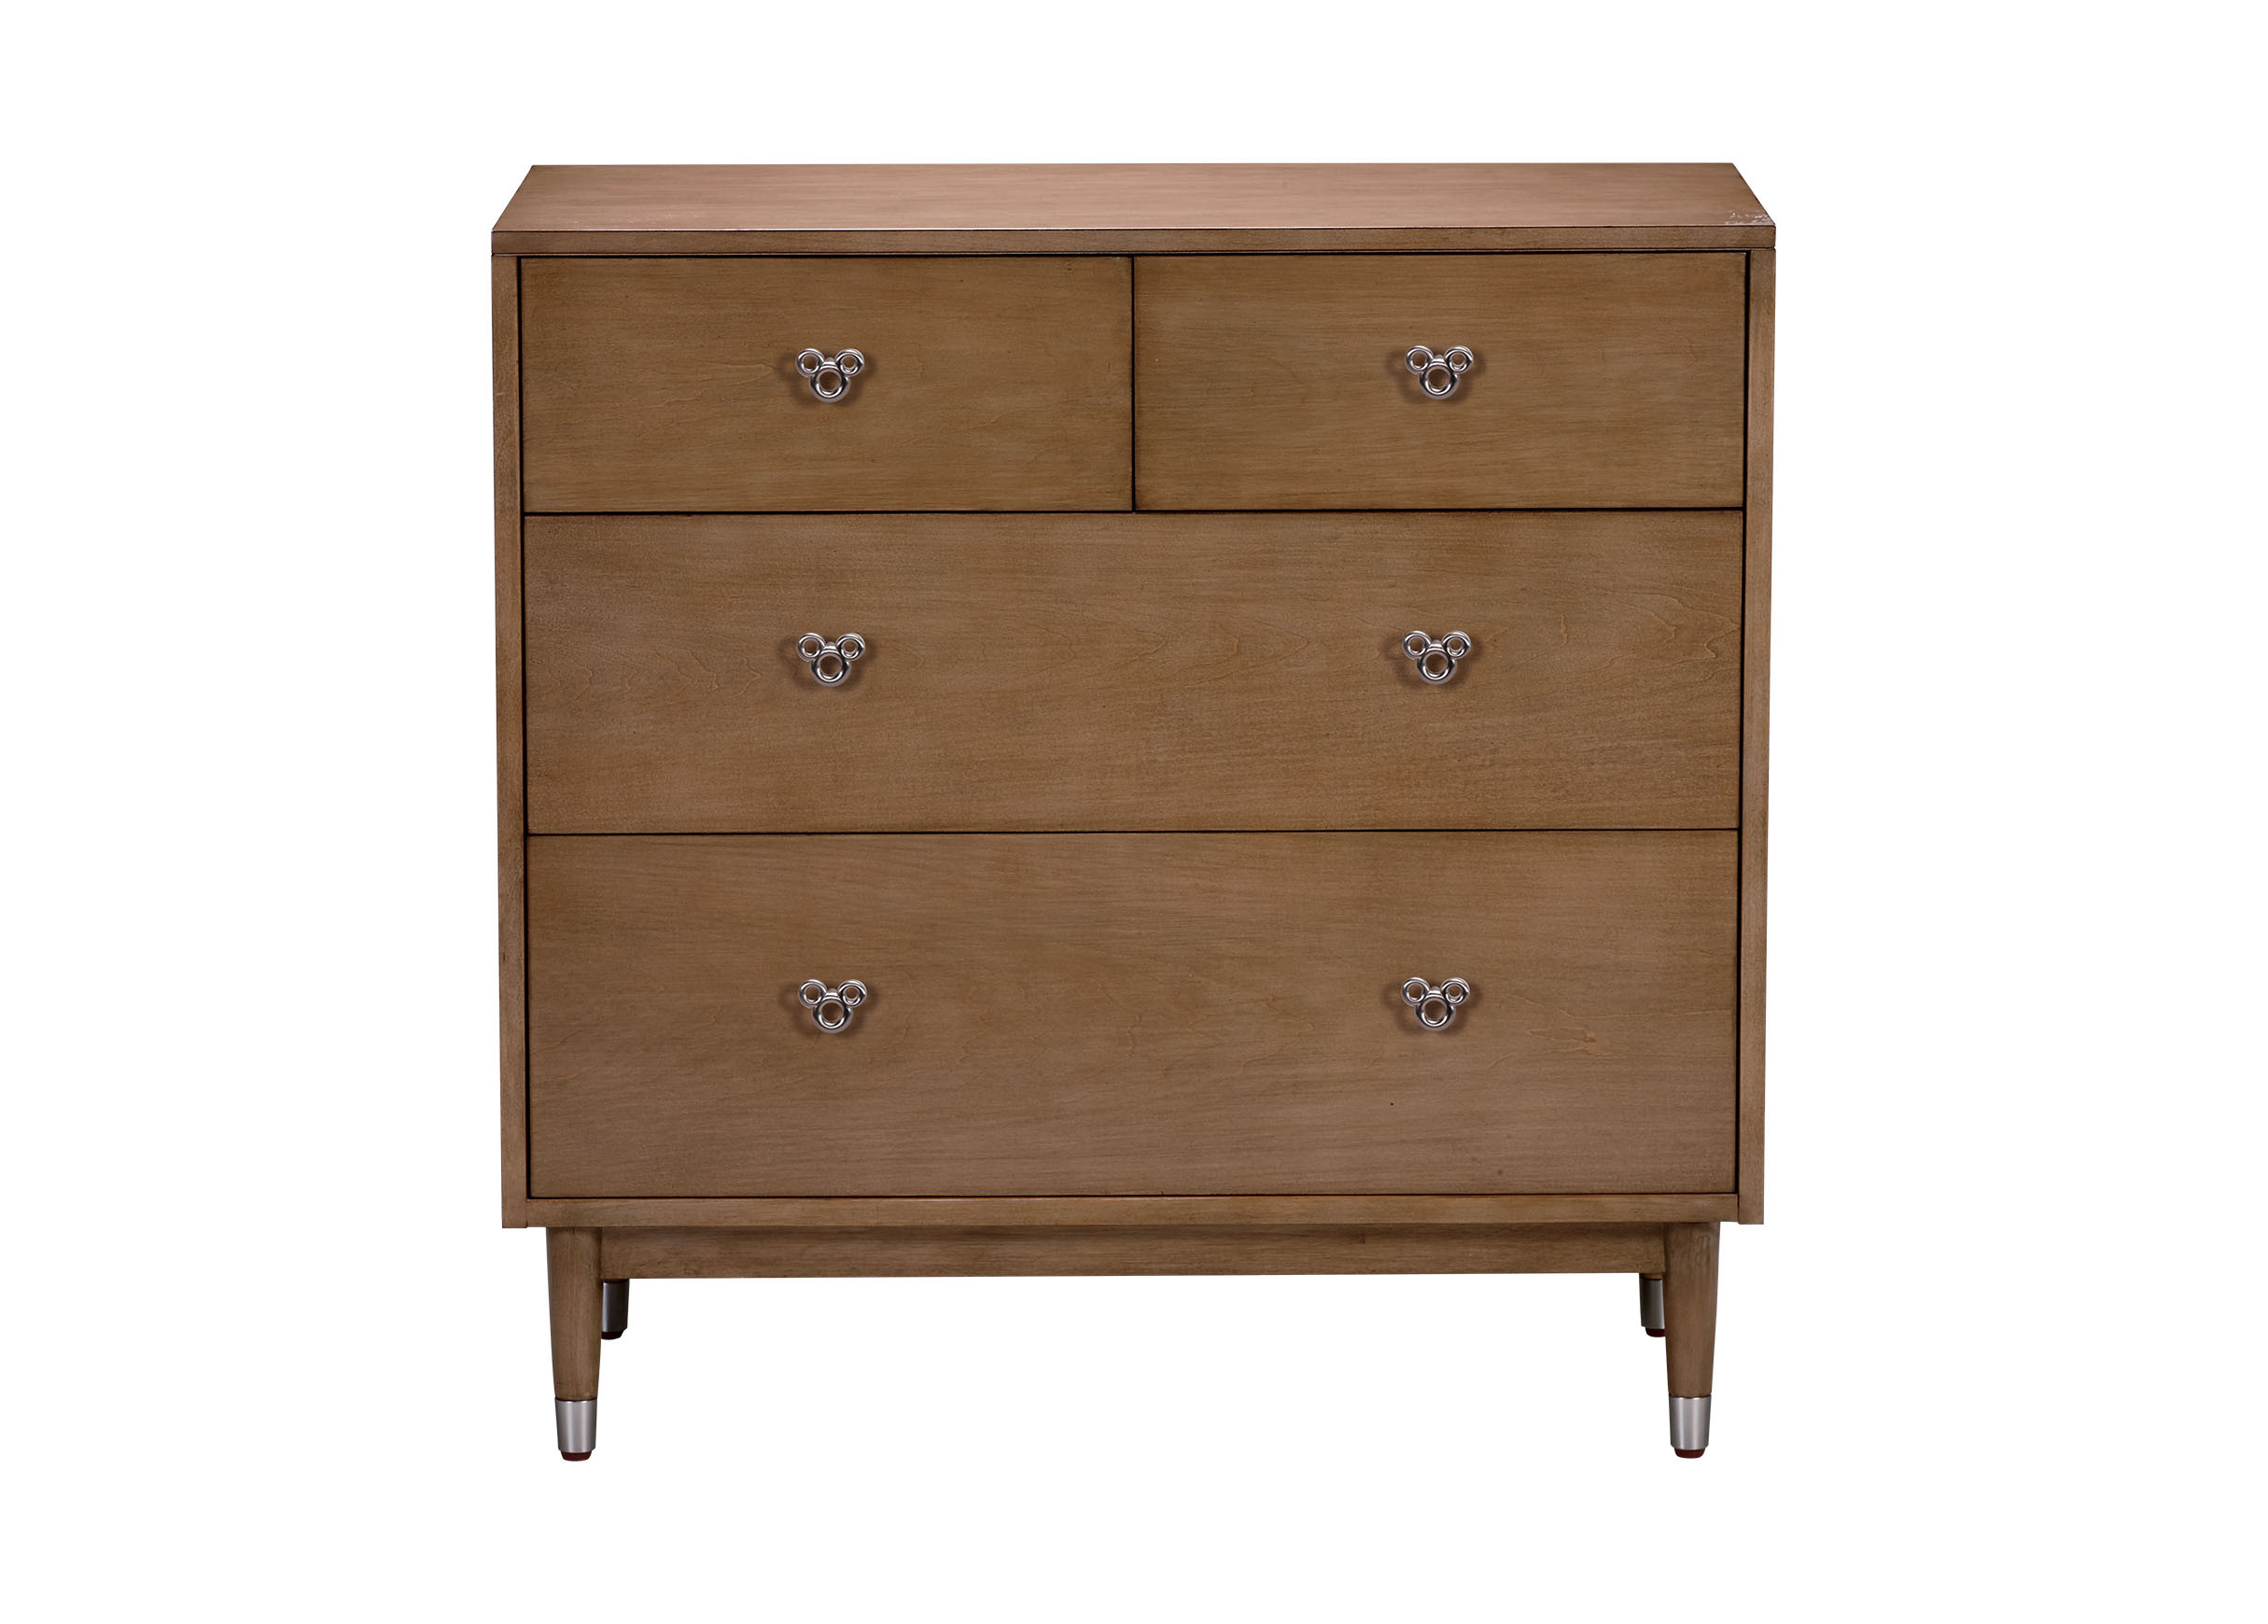 Small Bedroom Chest
 Carolwood Small Dresser